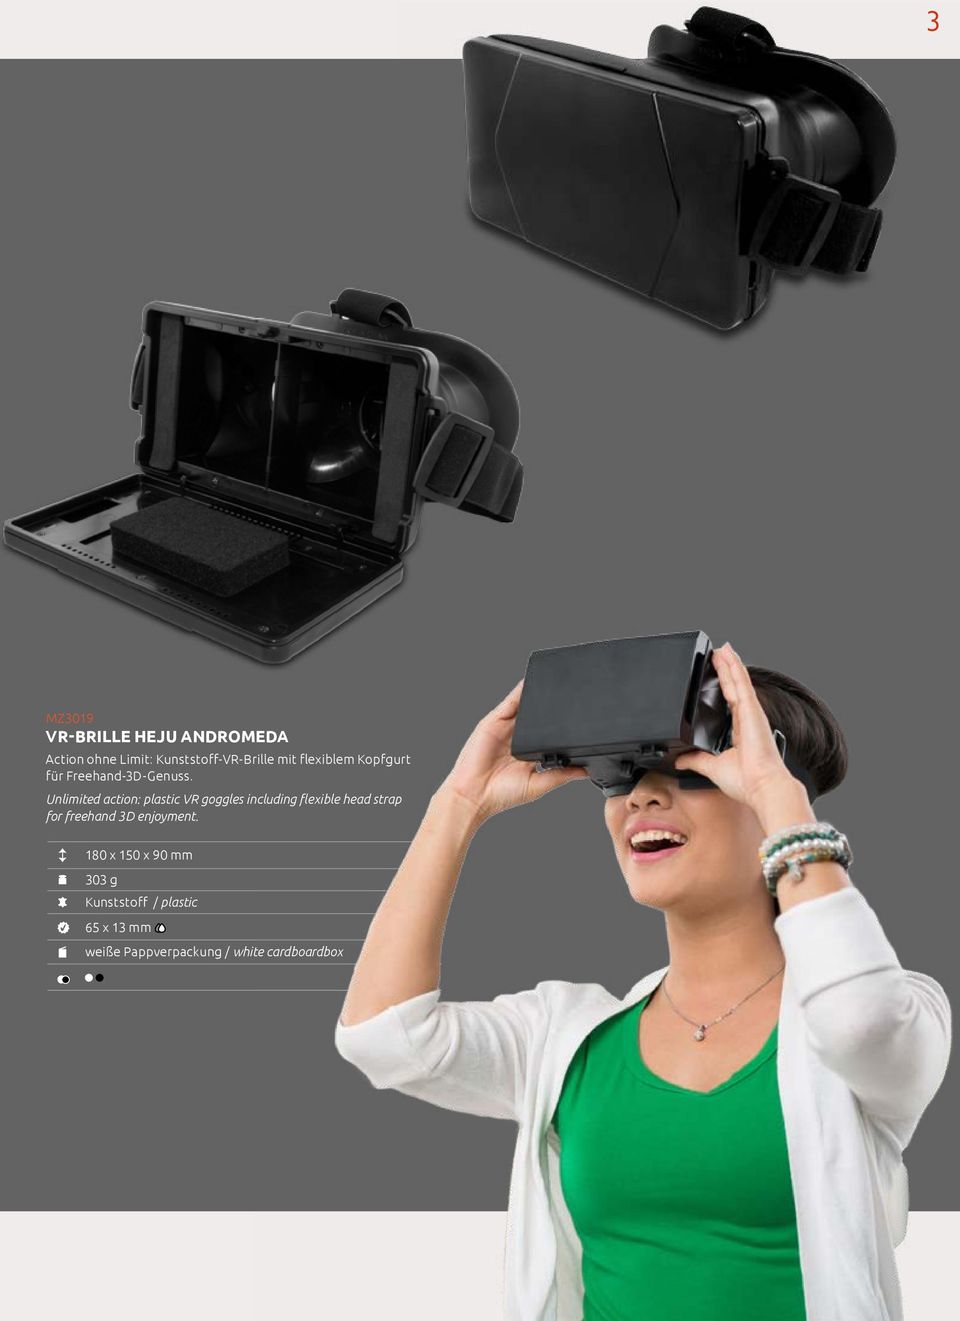 Unlimited action: plastic VR goggles including flexible head strap for